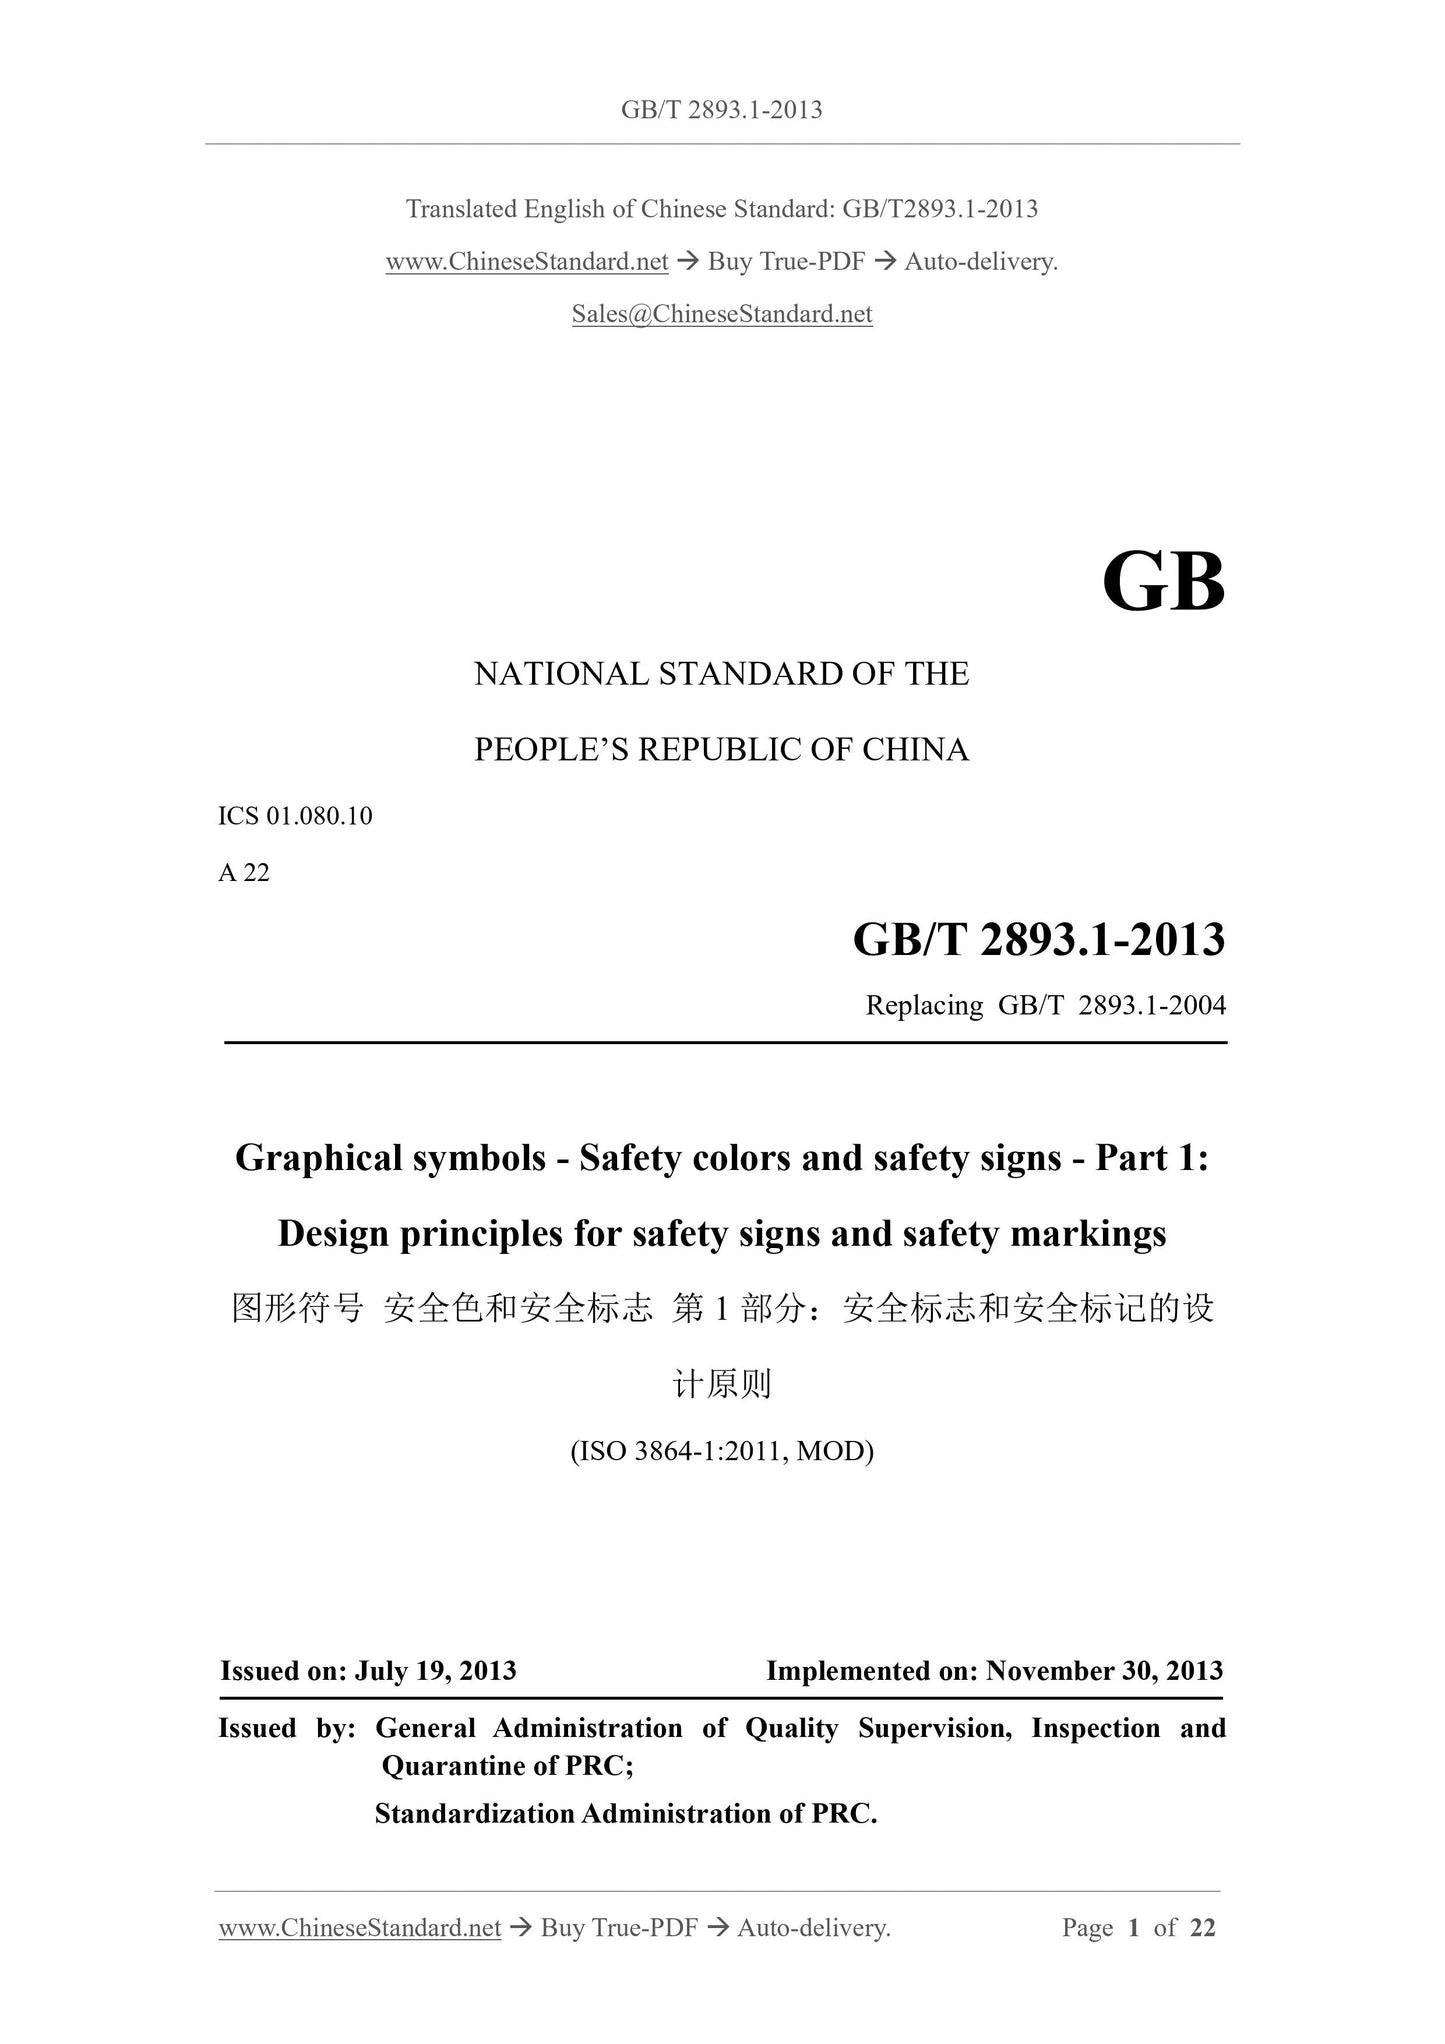 GB/T 2893.1-2013 Page 1